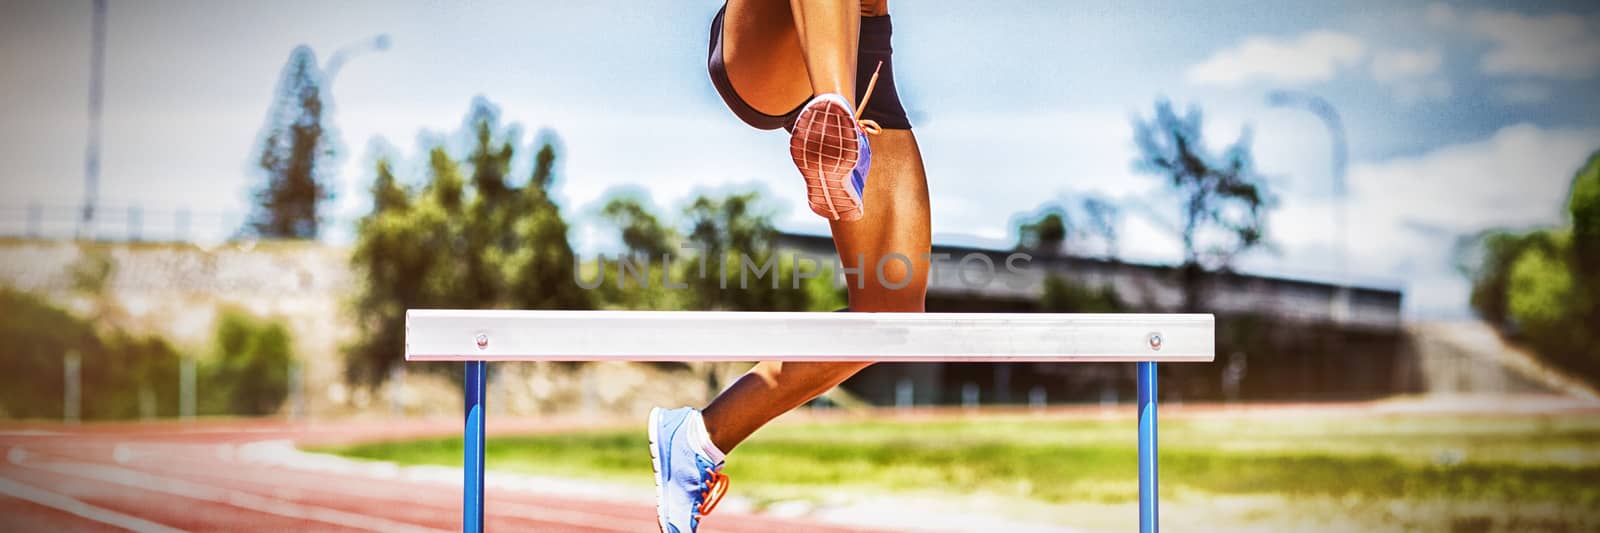 Female athlete jumping above the hurdle by Wavebreakmedia